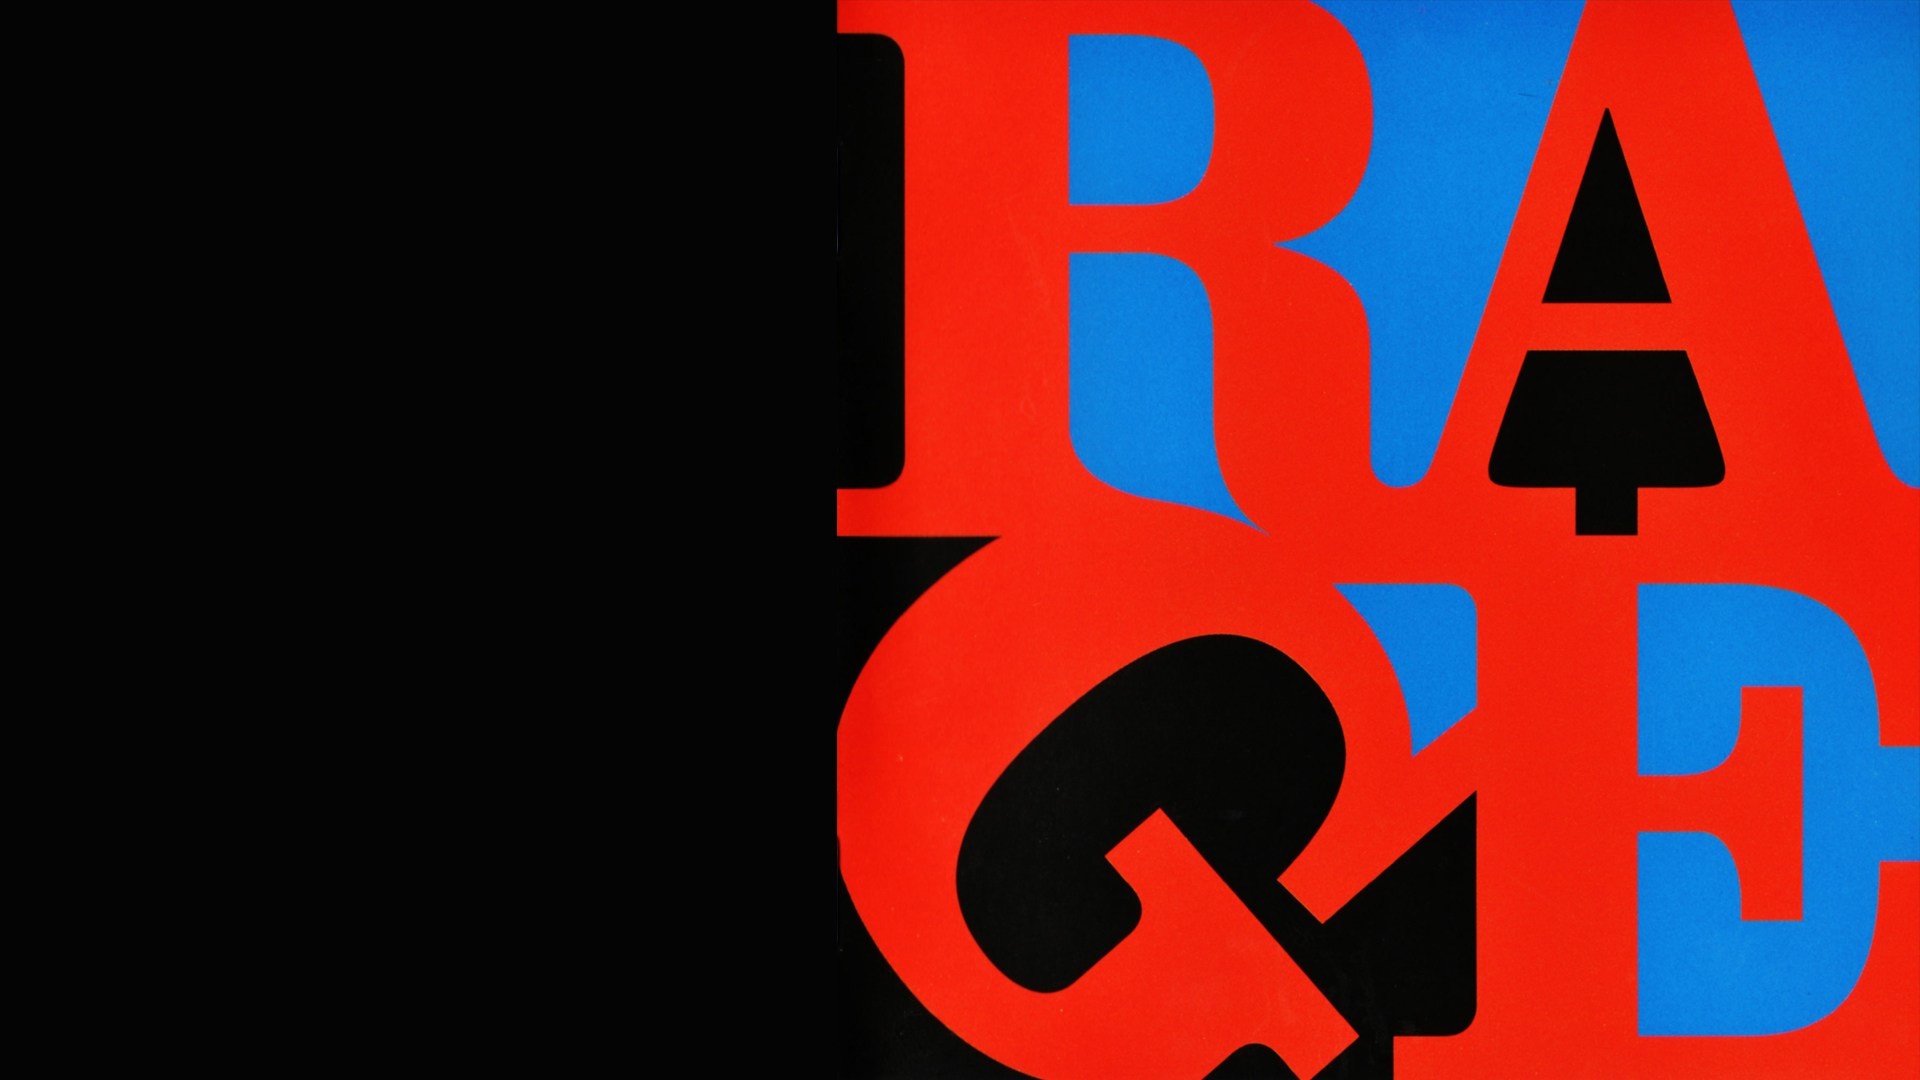 rage against the machine wallpaper,font,red,text,logo,graphic design